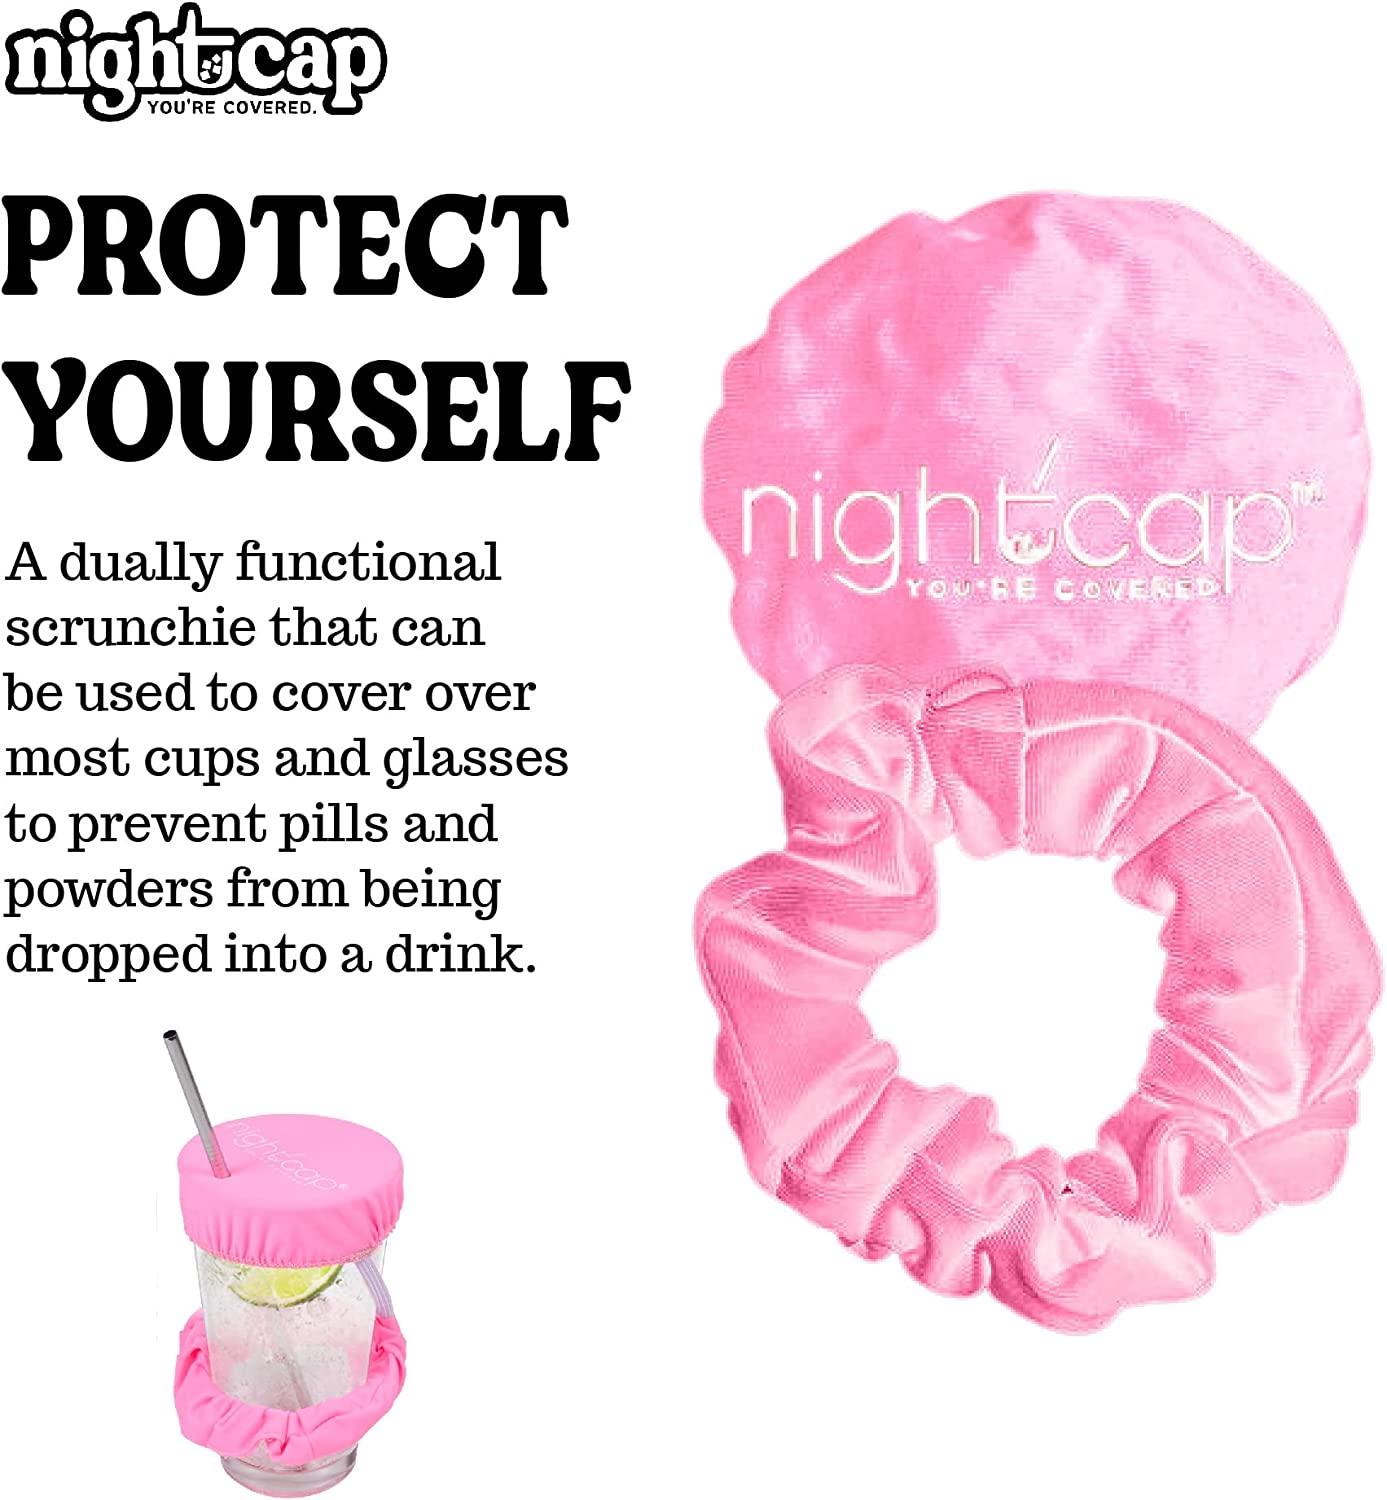 NightCap Scrunchie Reviews - Portable Drink Cover For Spiked Drinks  Protection?